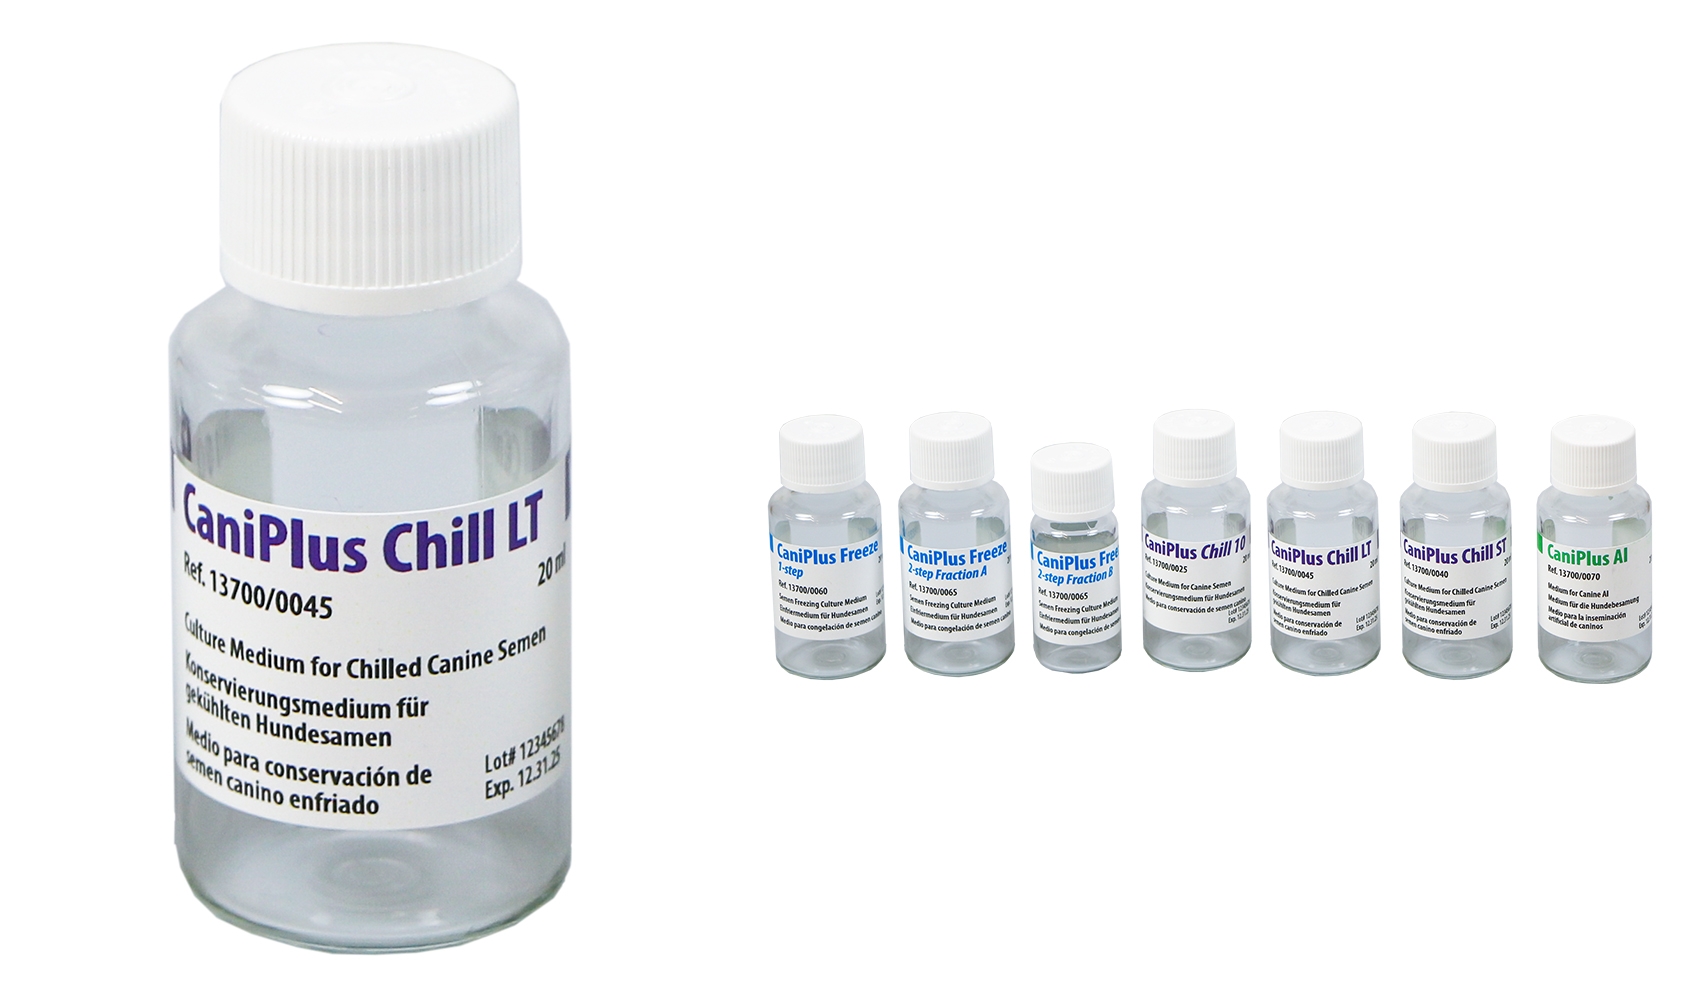 Image for CaniPlus Chill LT: long term culture medium for chilled canine semen